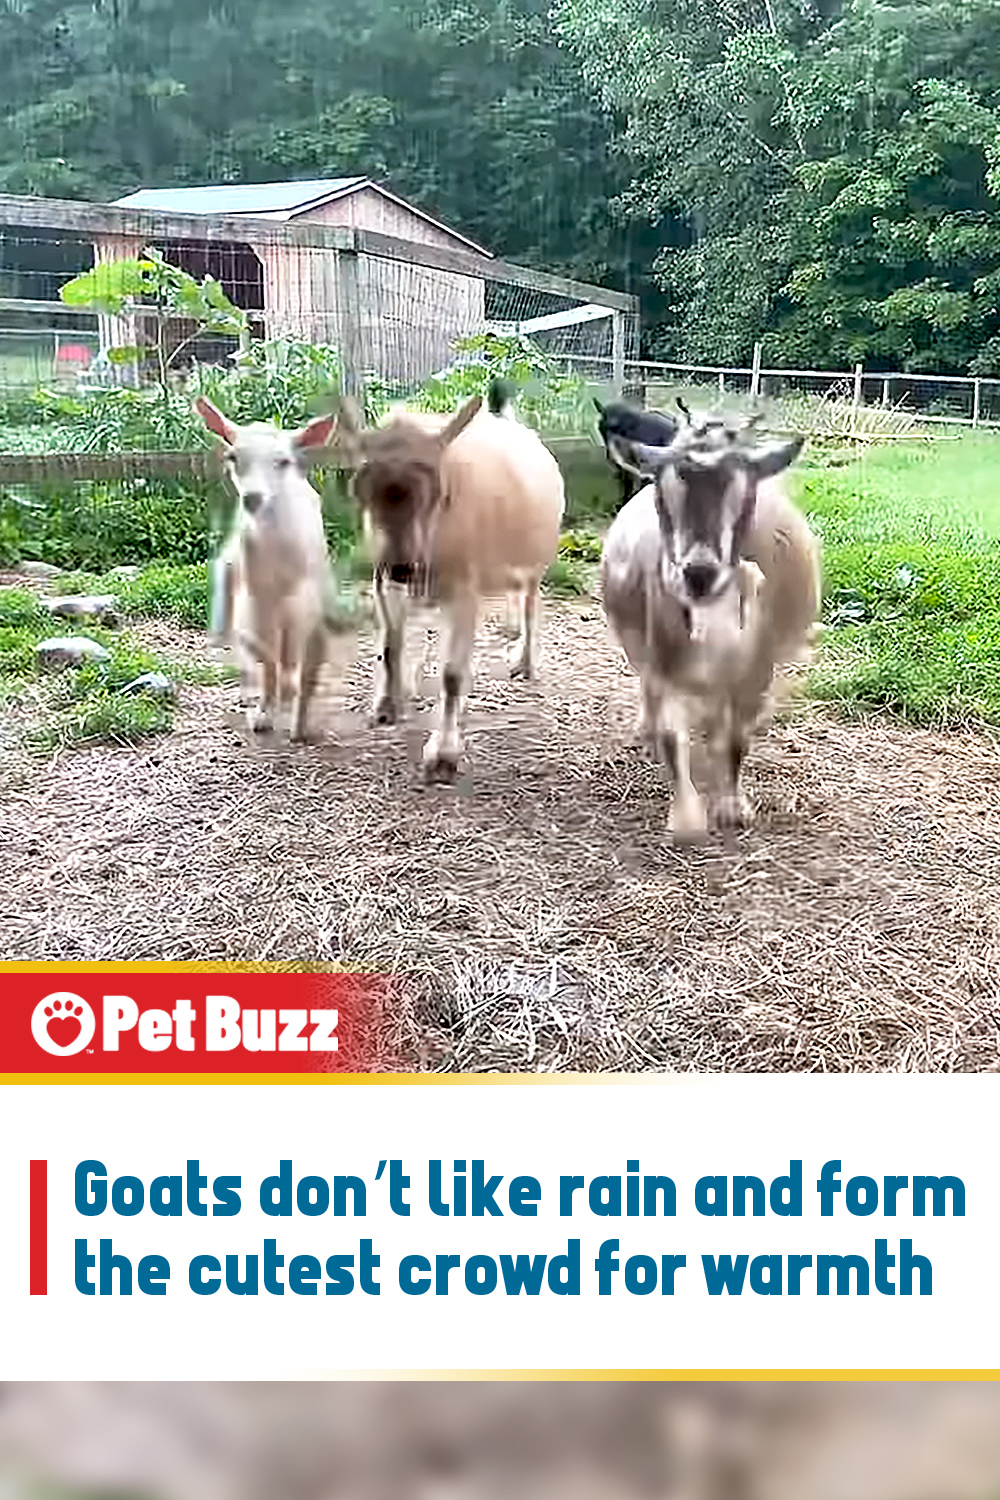 Goats don’t like rain and form the cutest crowd for warmth